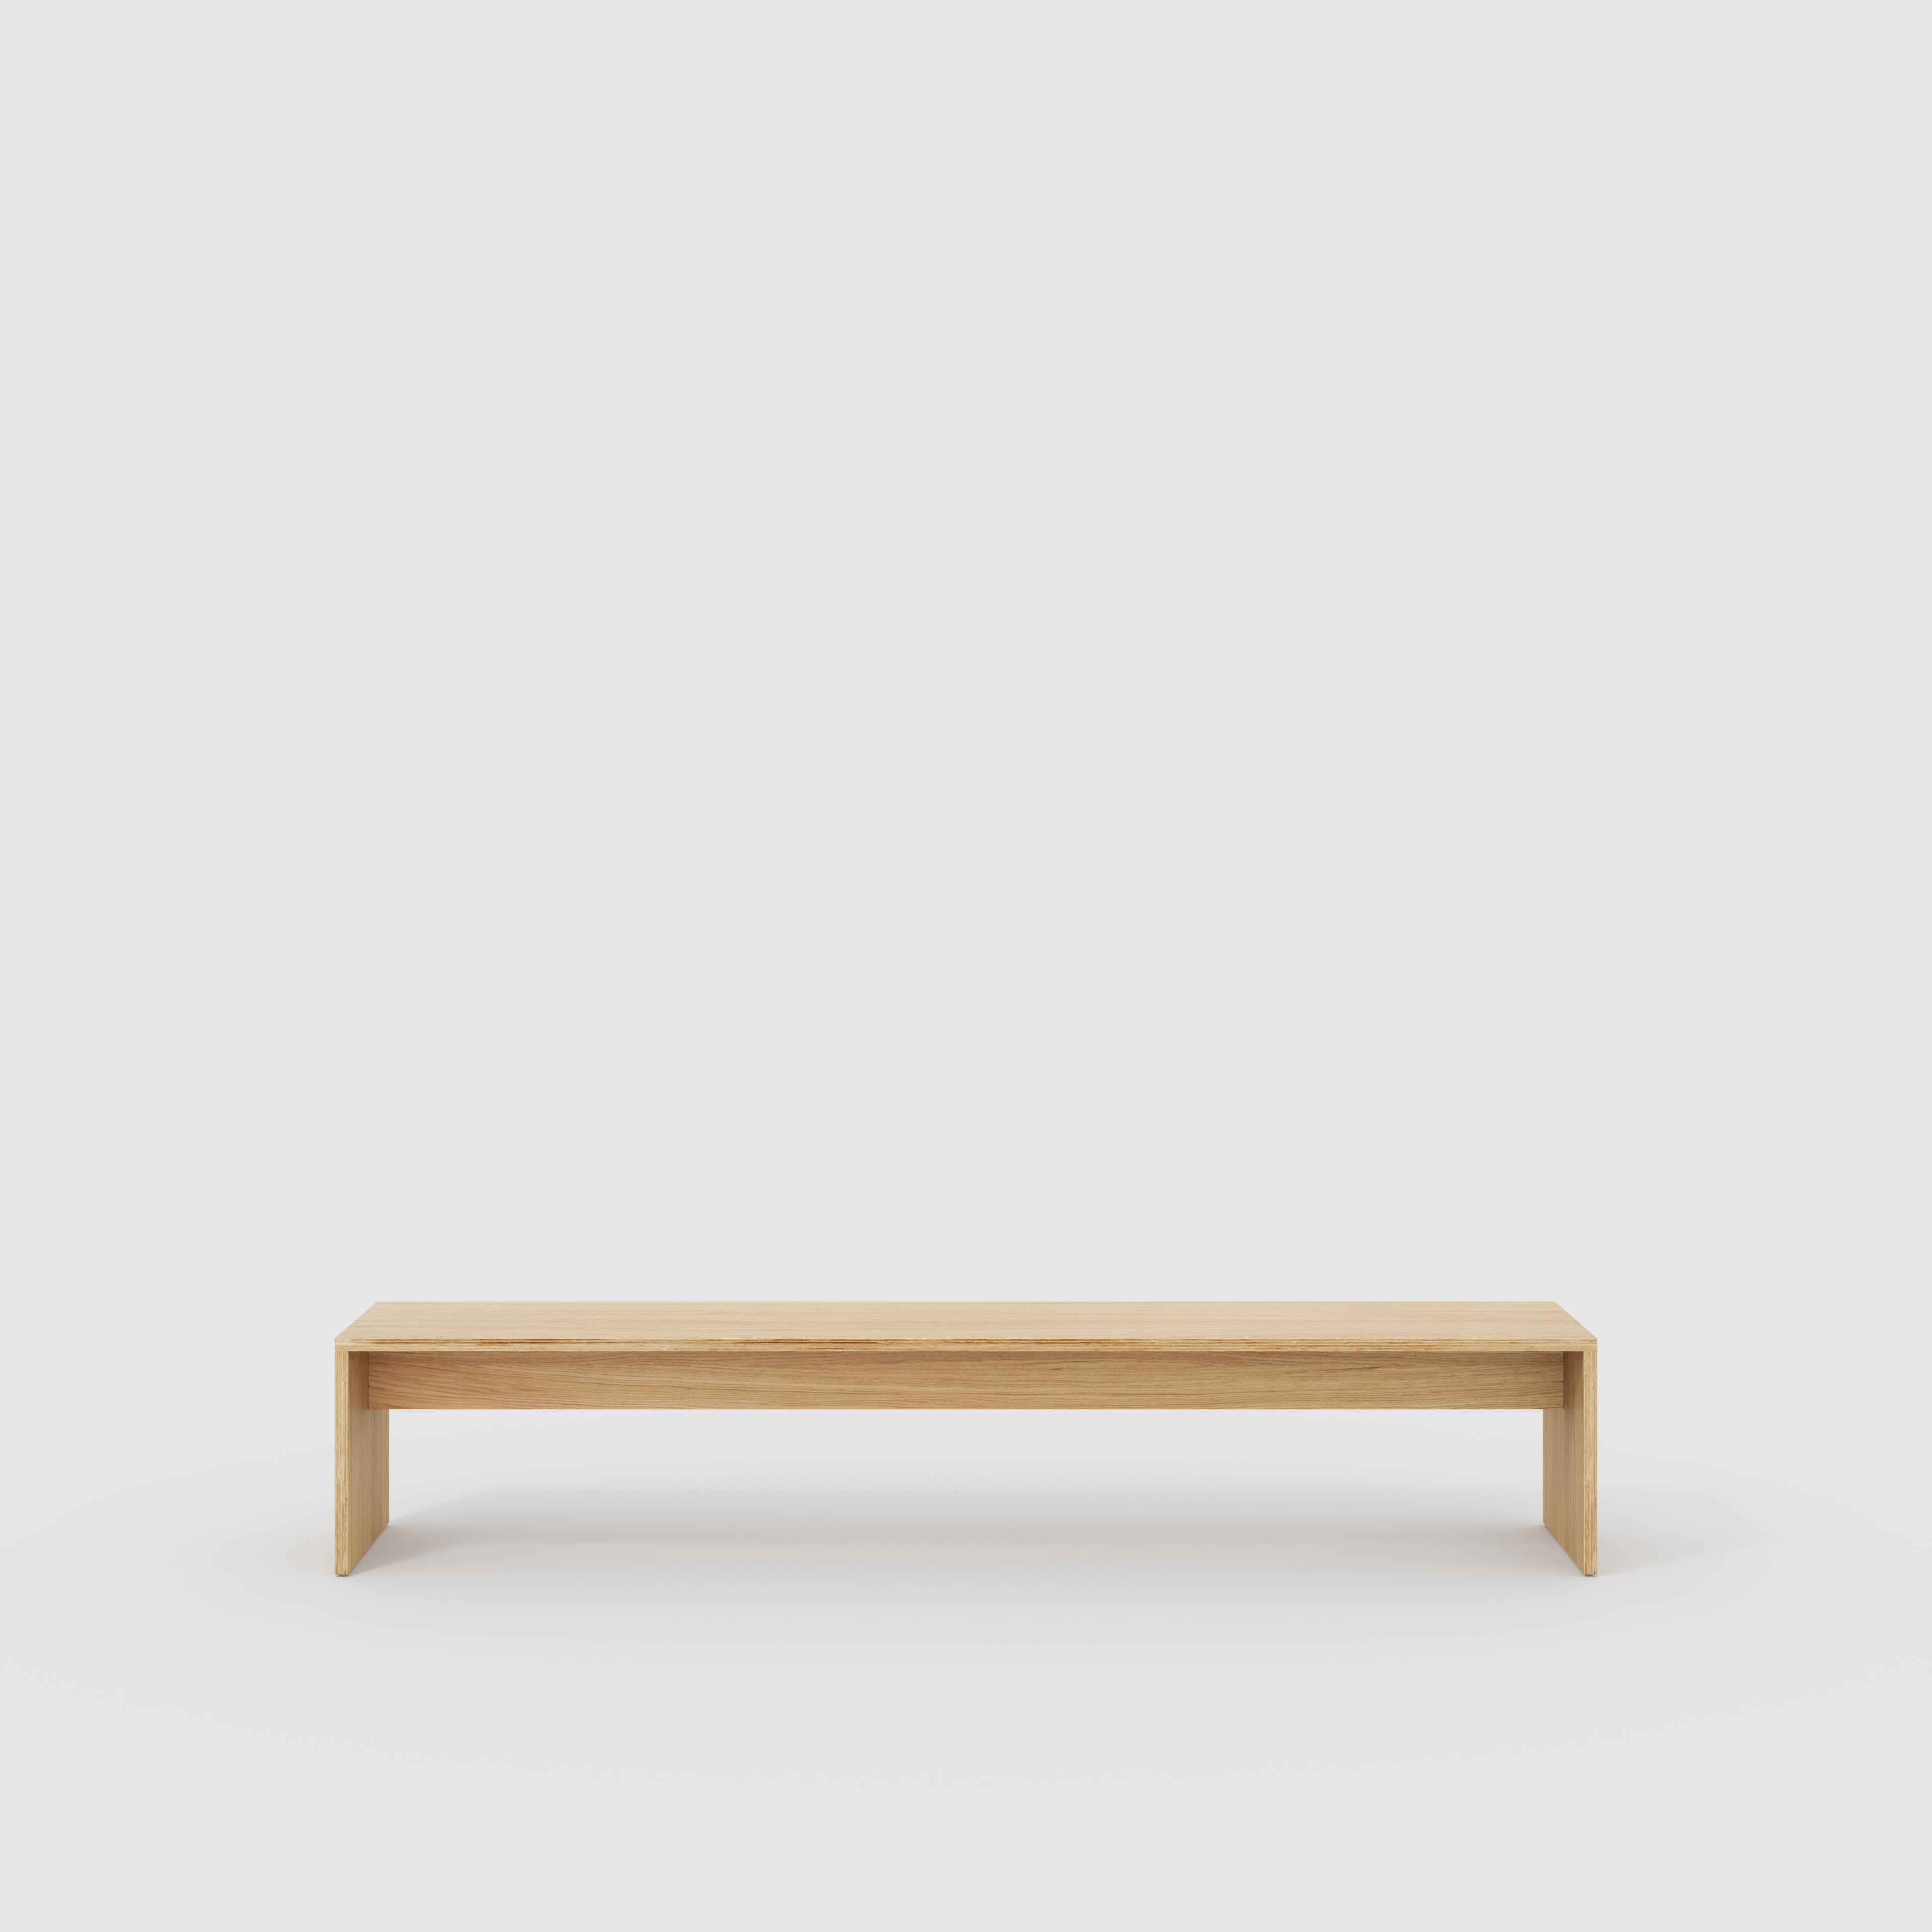 Bench Seat with Solid Sides - Plywood Oak - 2400(w) x 400(d)